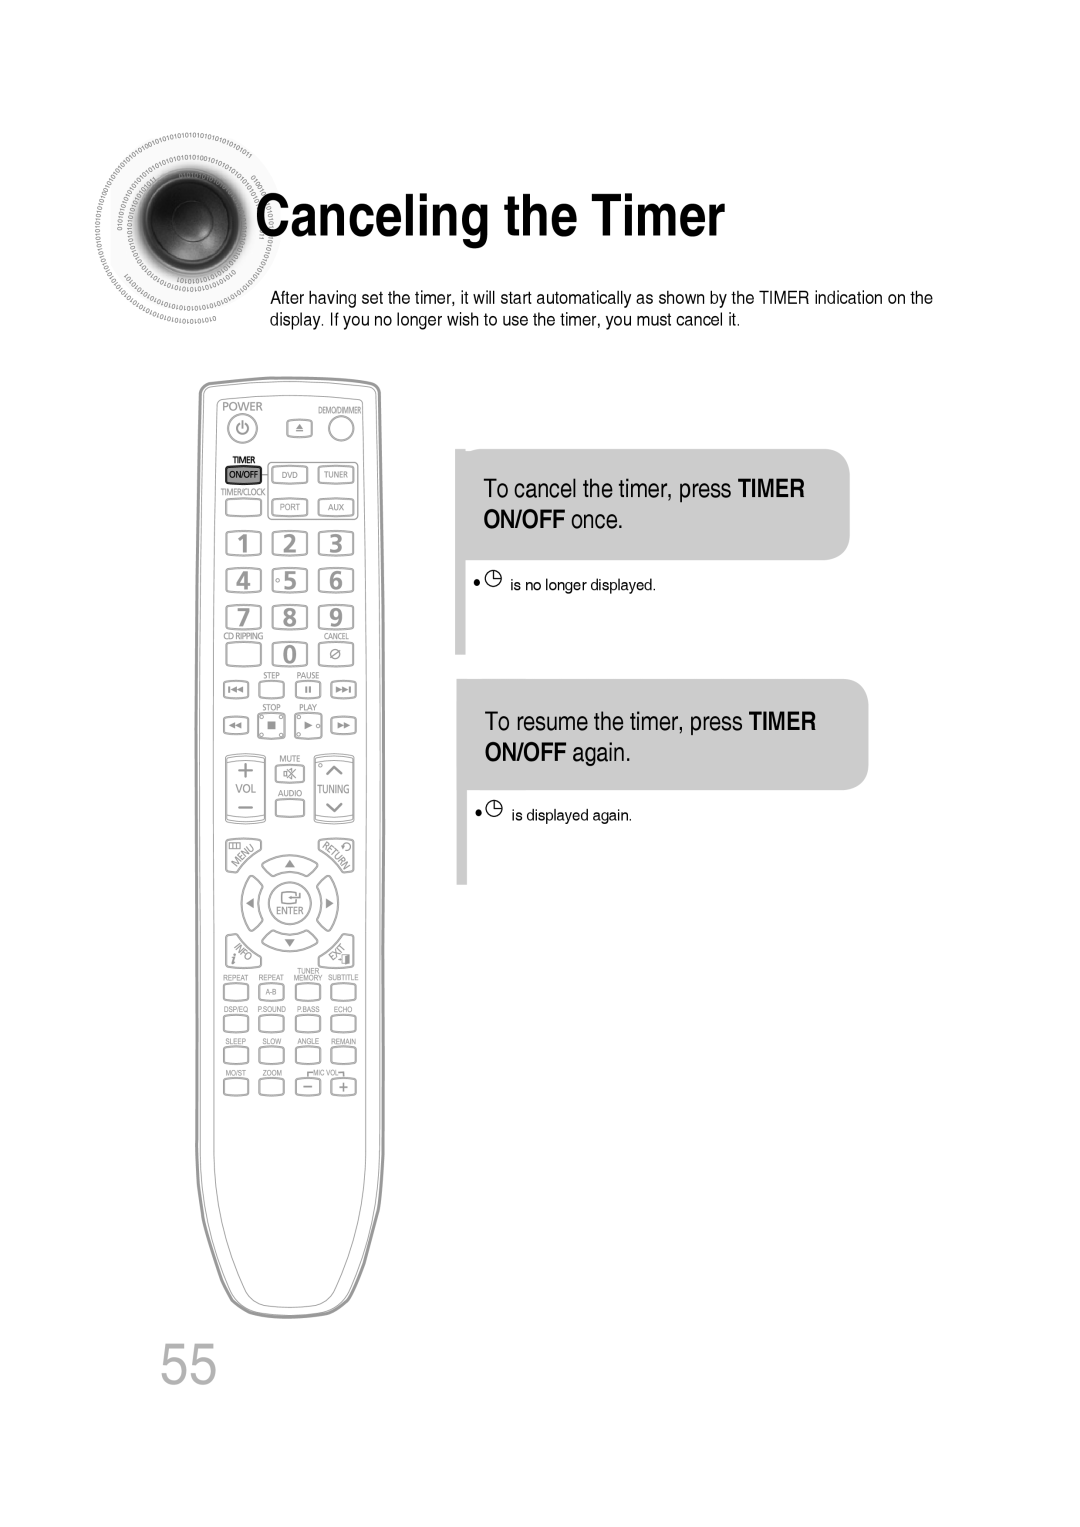 Samsung MM-C530D Canceling the Timer, To cancel the timer, press TIMER, ON/OFF once, To resume the timer, press TIMER 